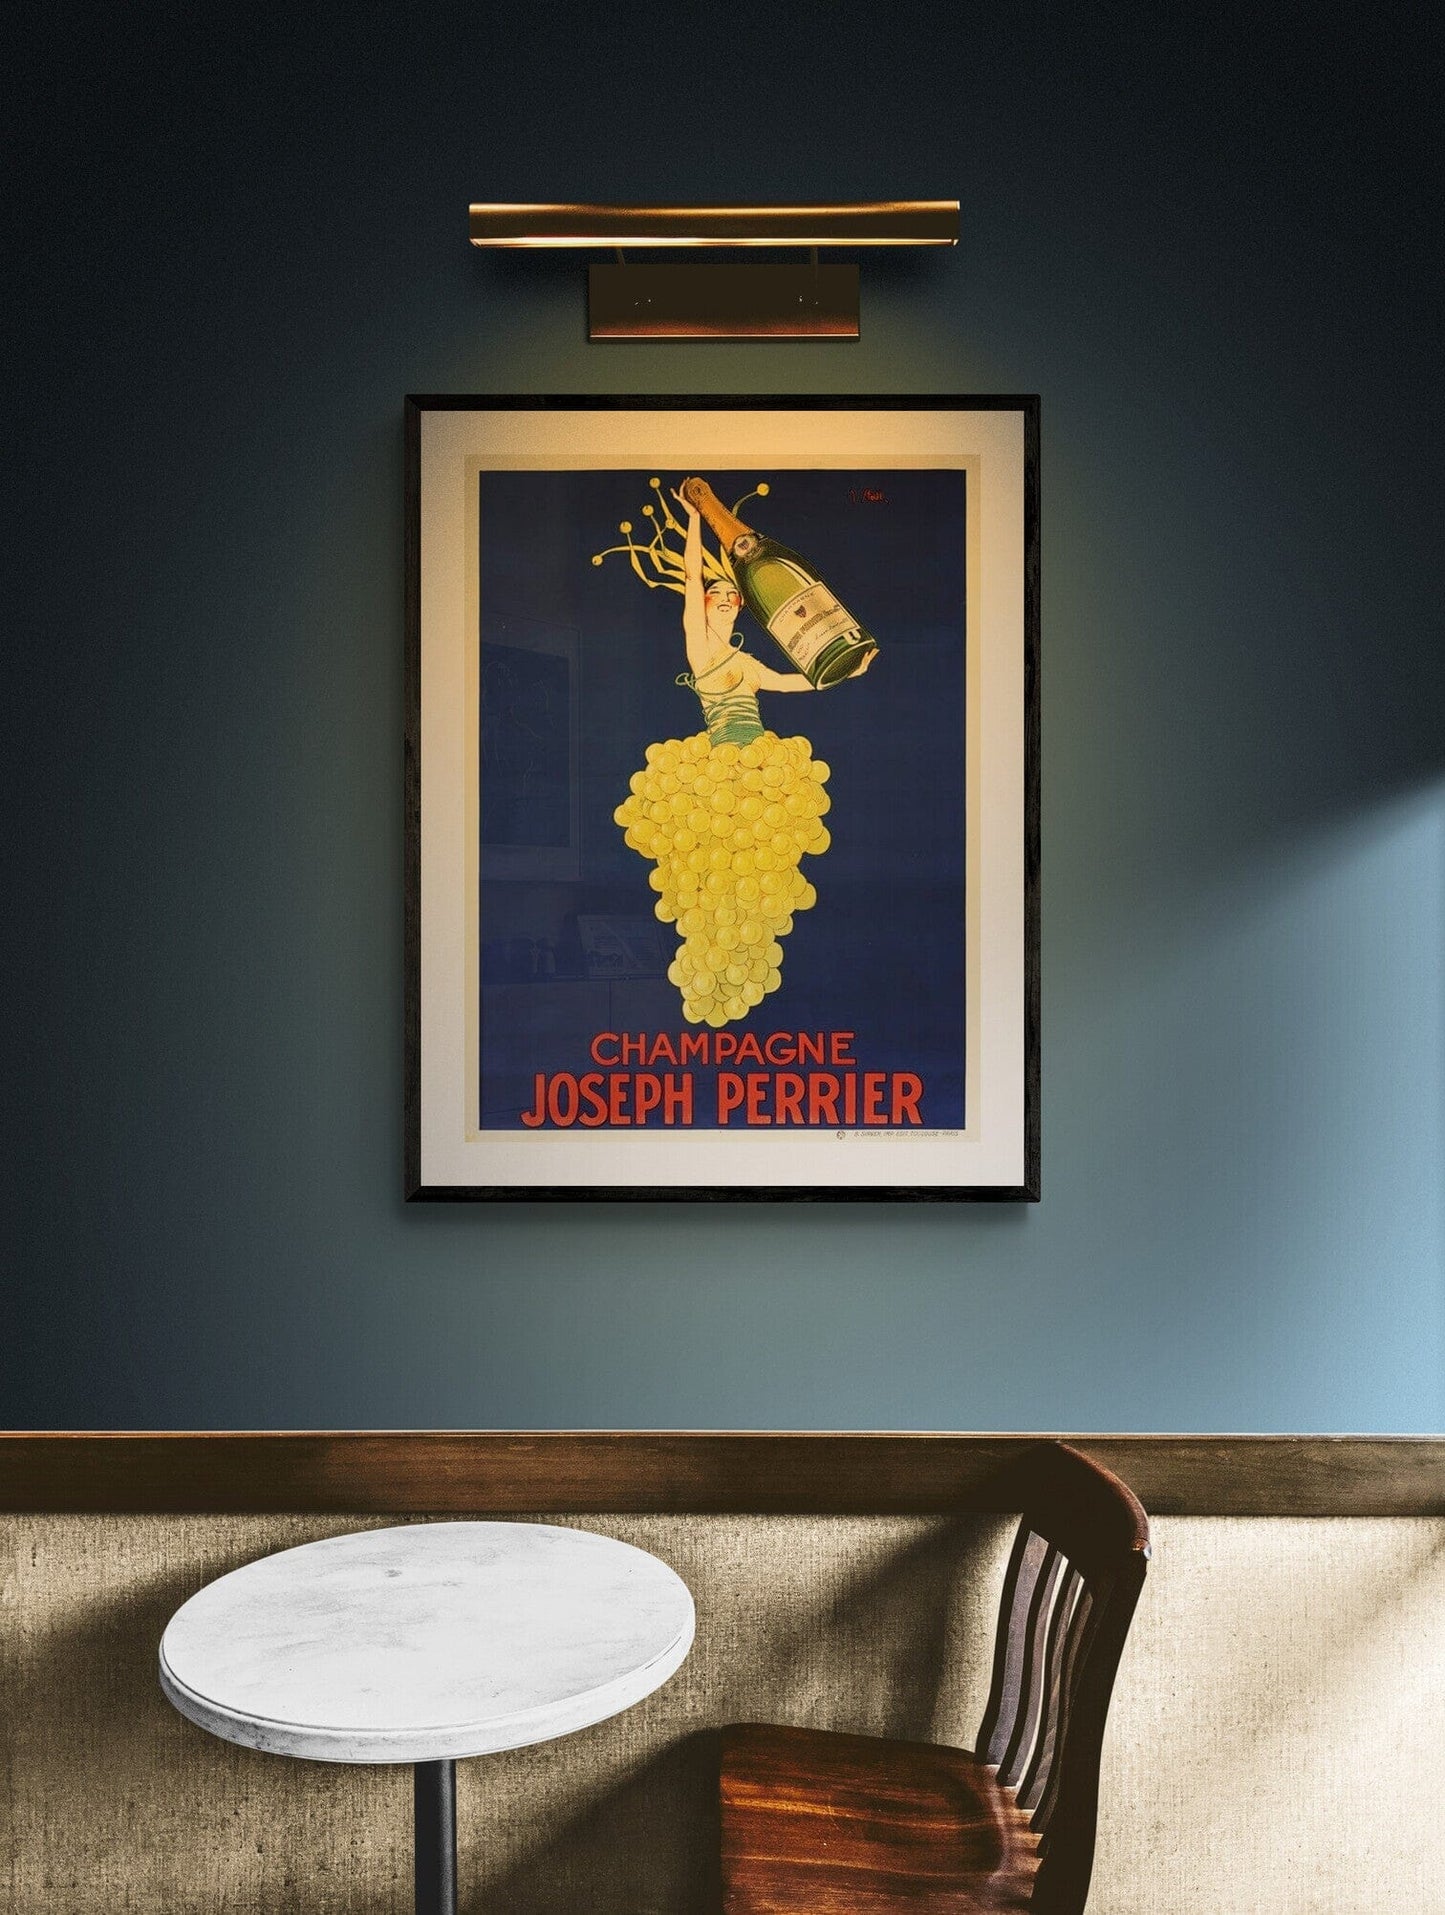 Joseph Perrier (1900s) | Vintage Champagne posters | Joseph Stall Posters, Prints, & Visual Artwork The Trumpet Shop   